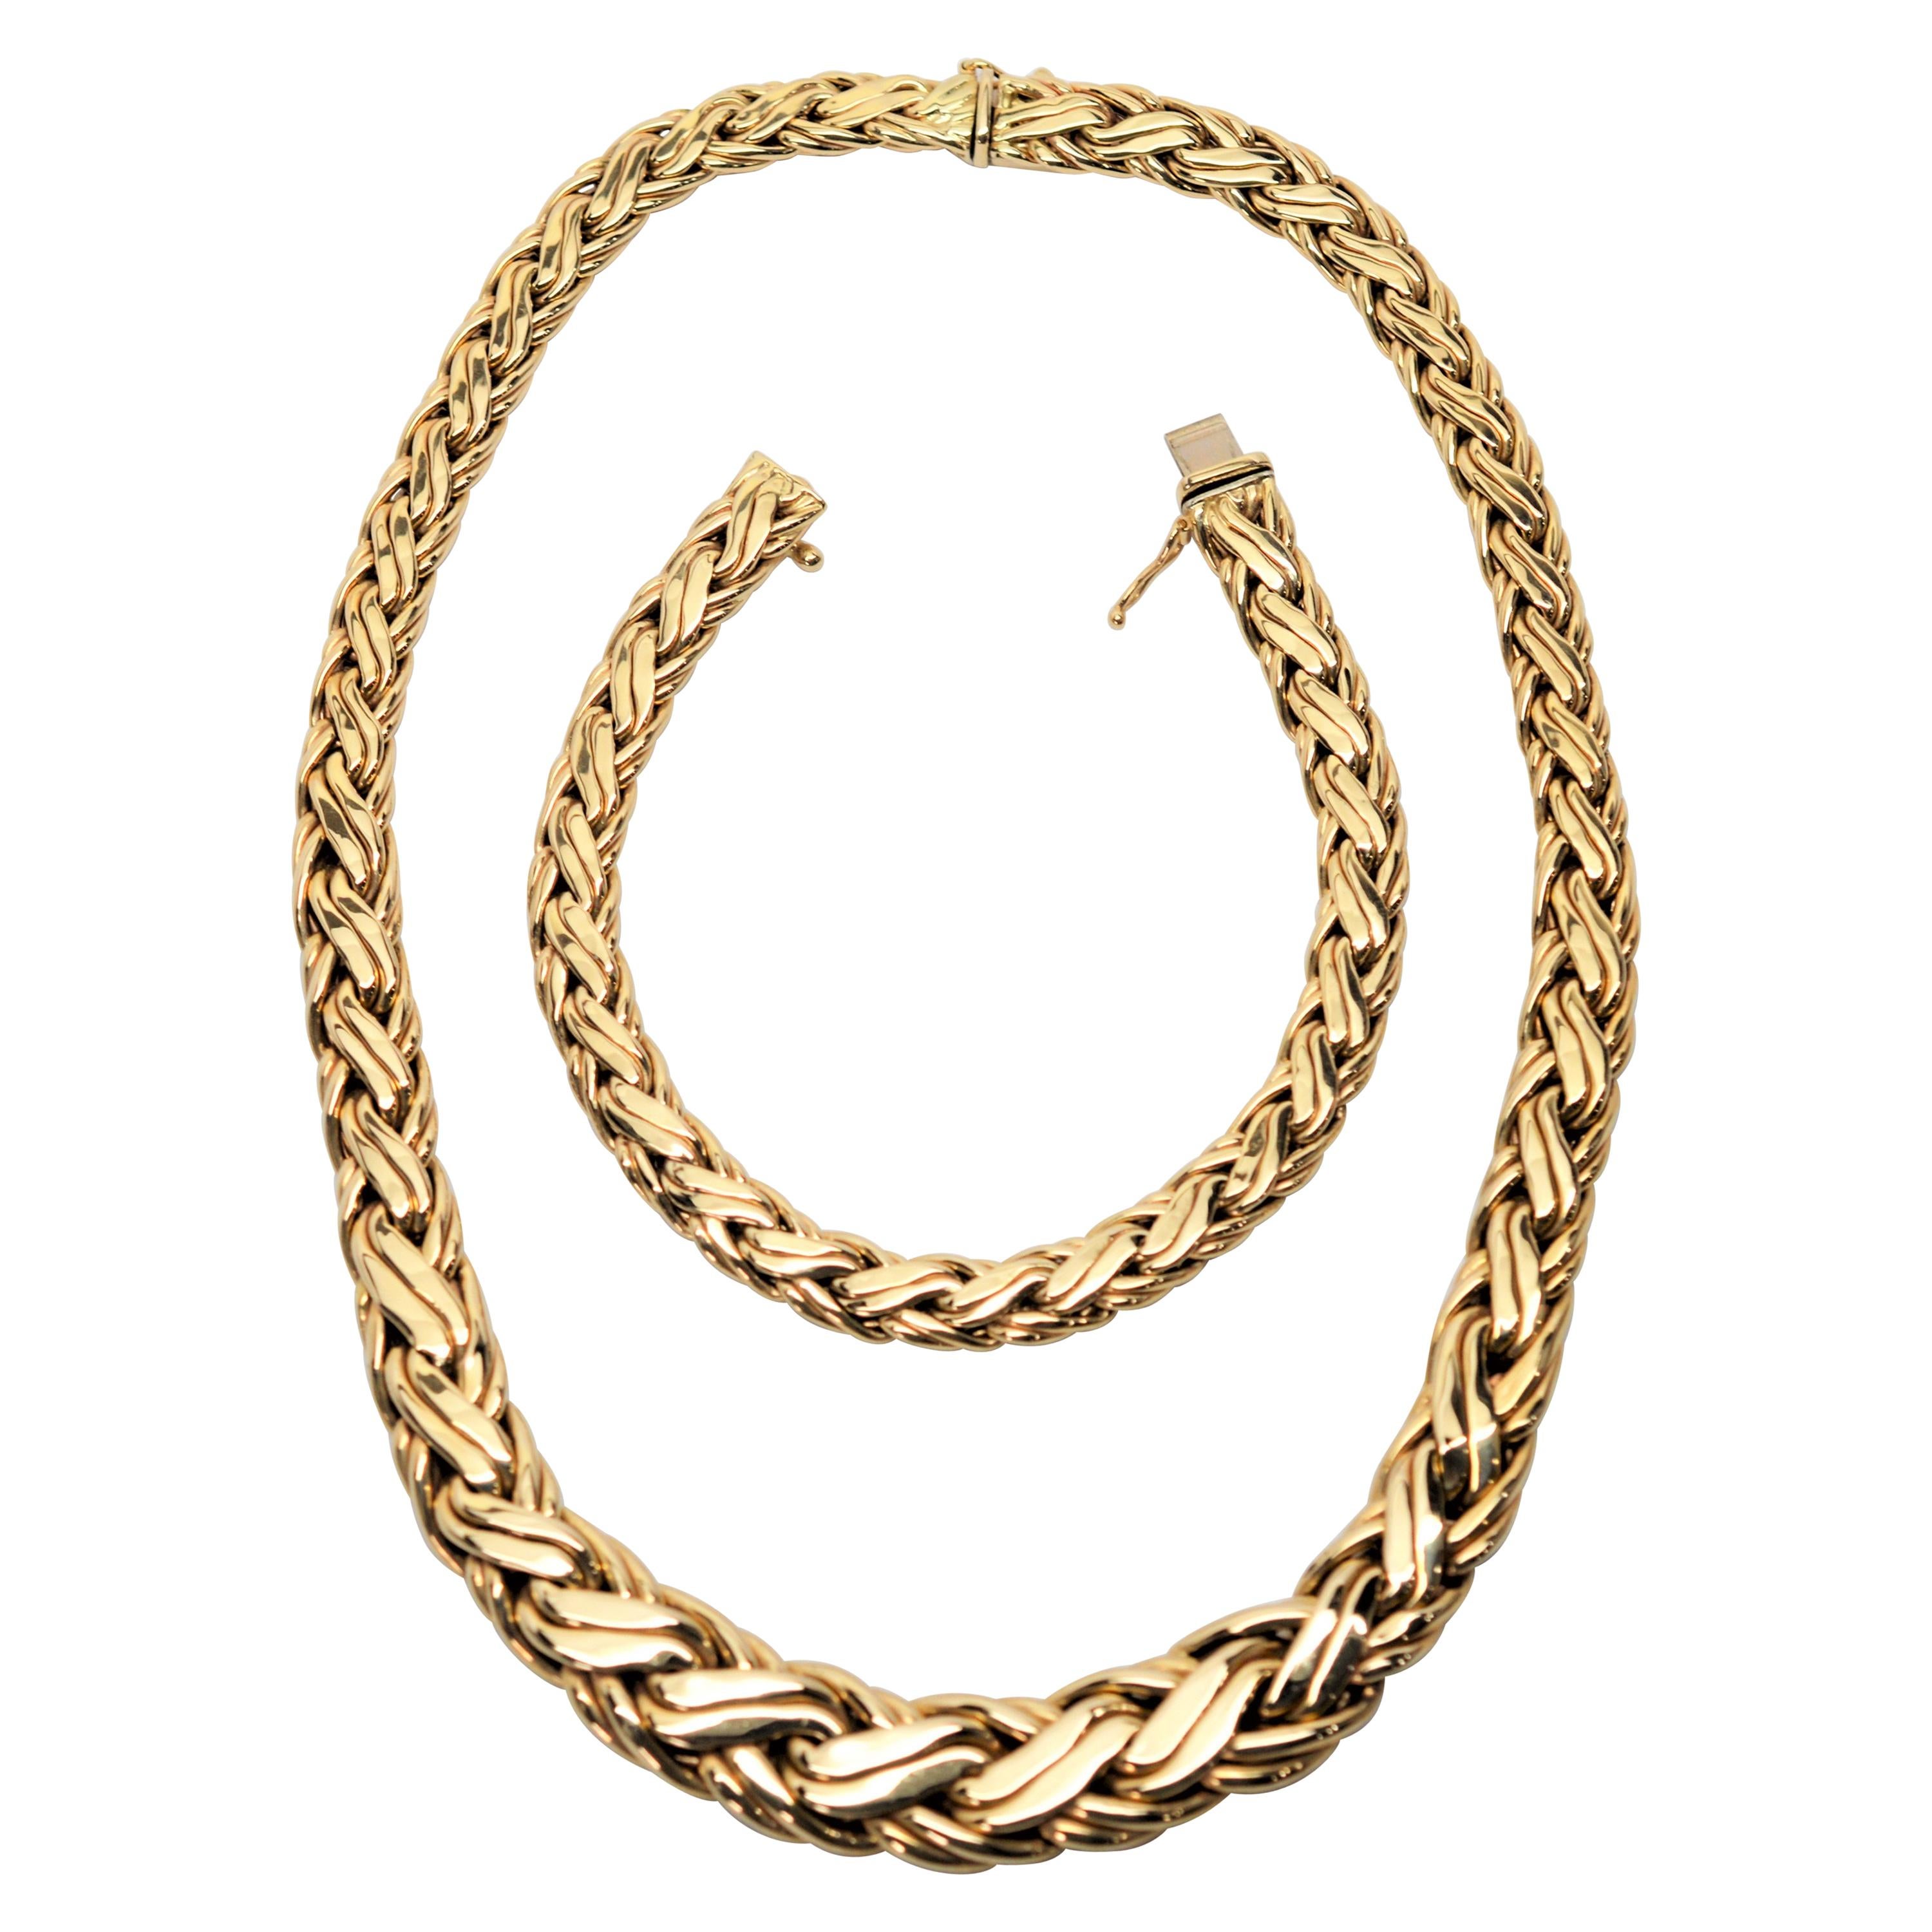 Fabulous matching necklace and bracelet set from Zelman & Friedman (Z&F) Jewelers. Both pieces are of a double braided thick fourteen carat 14K gold and stamped and signed the New York City maker. The graduated collar necklace measures 16 inches